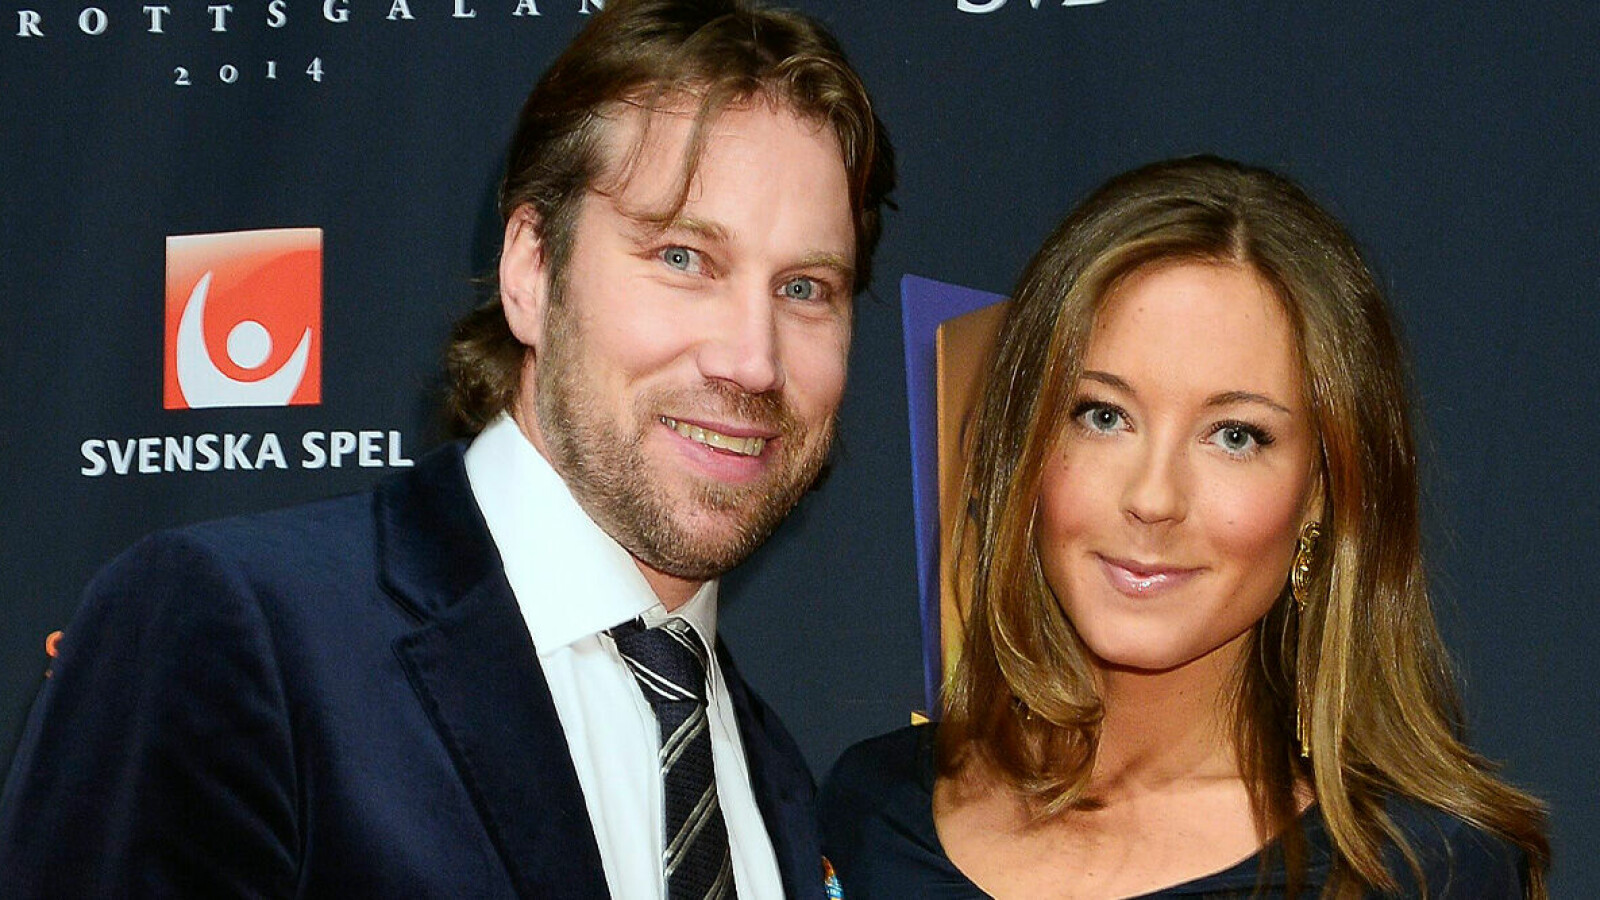 Peter Forsberg and his wife Nicole Nordin